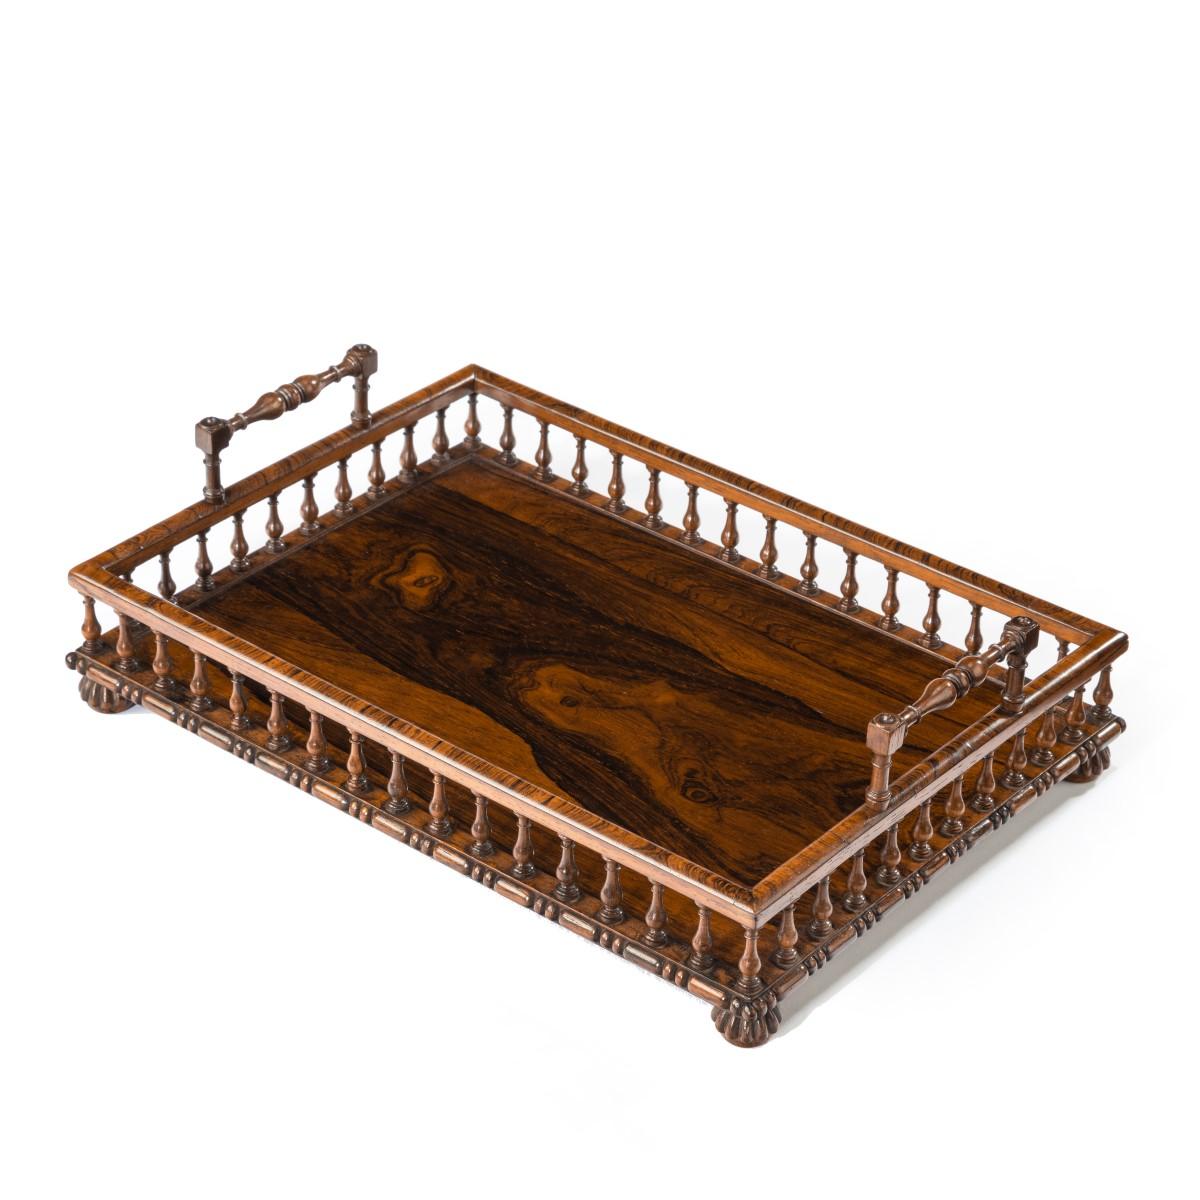 A Regency rosewood book tray attributed to Gillows